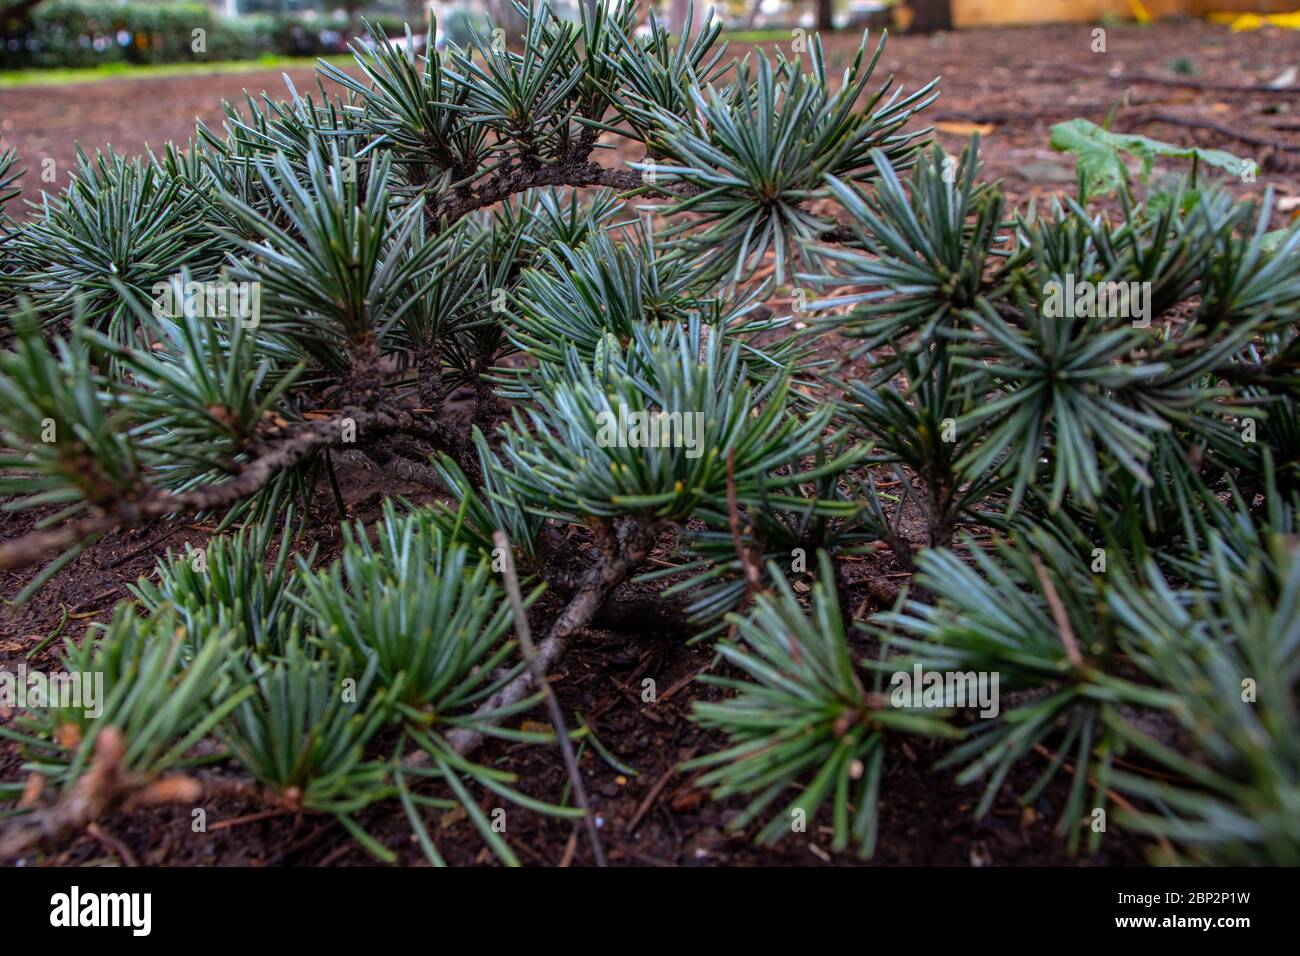 Rome, the branches of Pino have fallen in the park. The needles are still green. Stock Photo